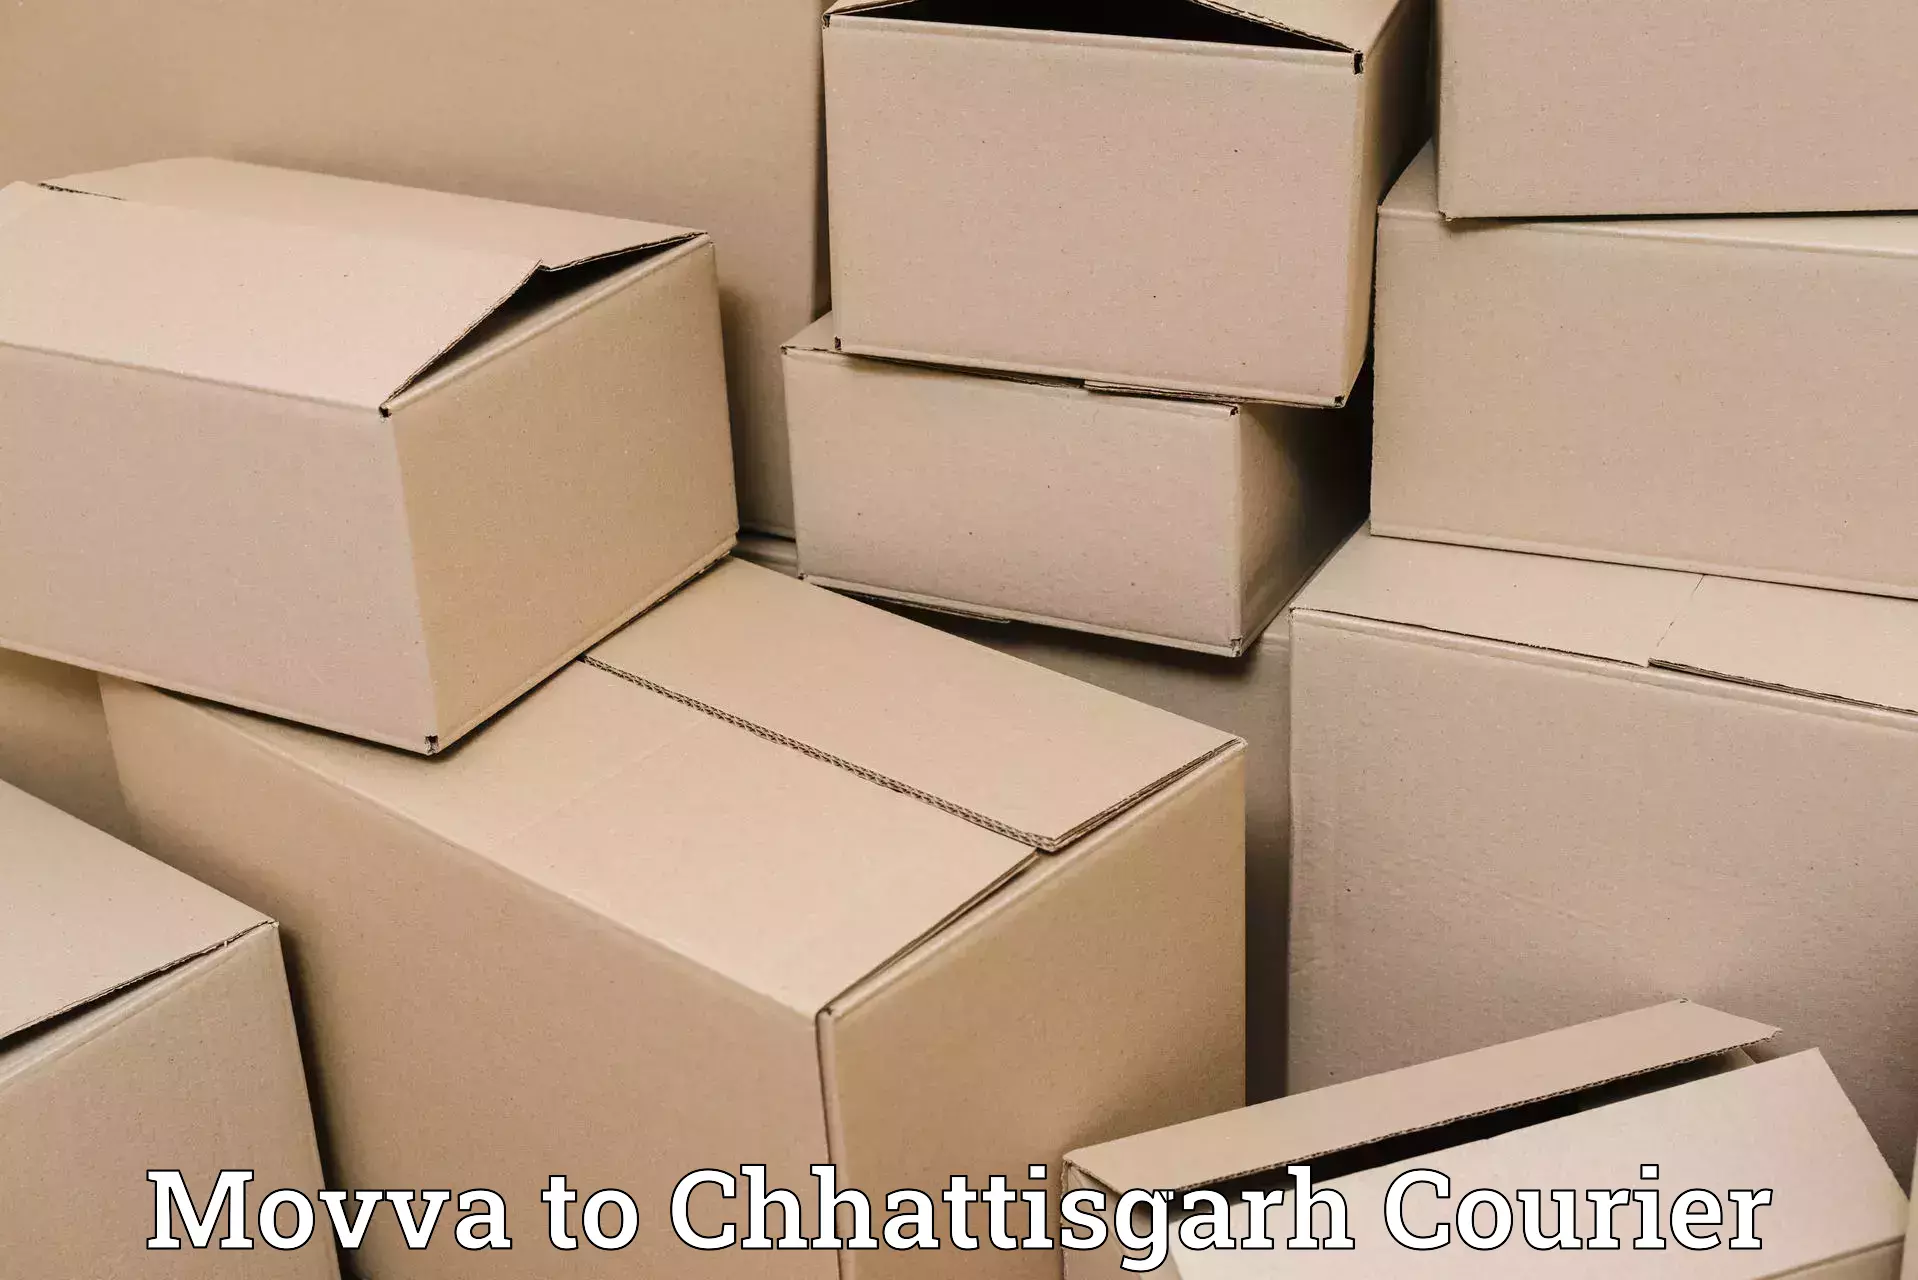 Optimized shipping services Movva to Raipur